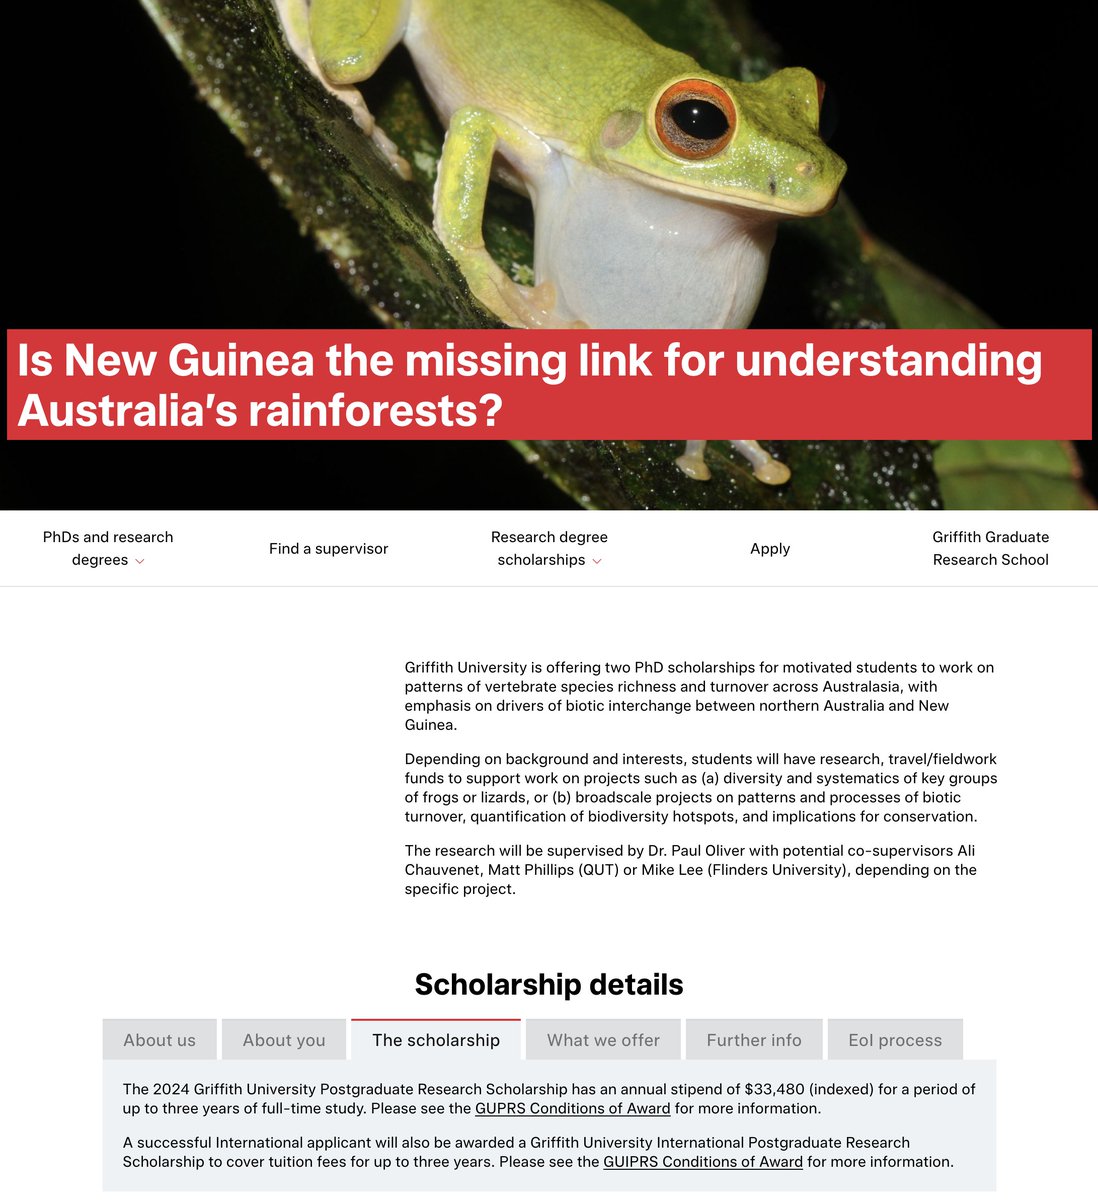 PhD Scholarship alert! Two positions open in the broad area of Australasian biogeography @Griffith_Uni in sunny (and biodiverse) Qld! Supervised by Paul Oliver, with possible co-supervision from @AChauvenet, Matt Phillips QUT or myself. Details: griffith.edu.au/research-study…